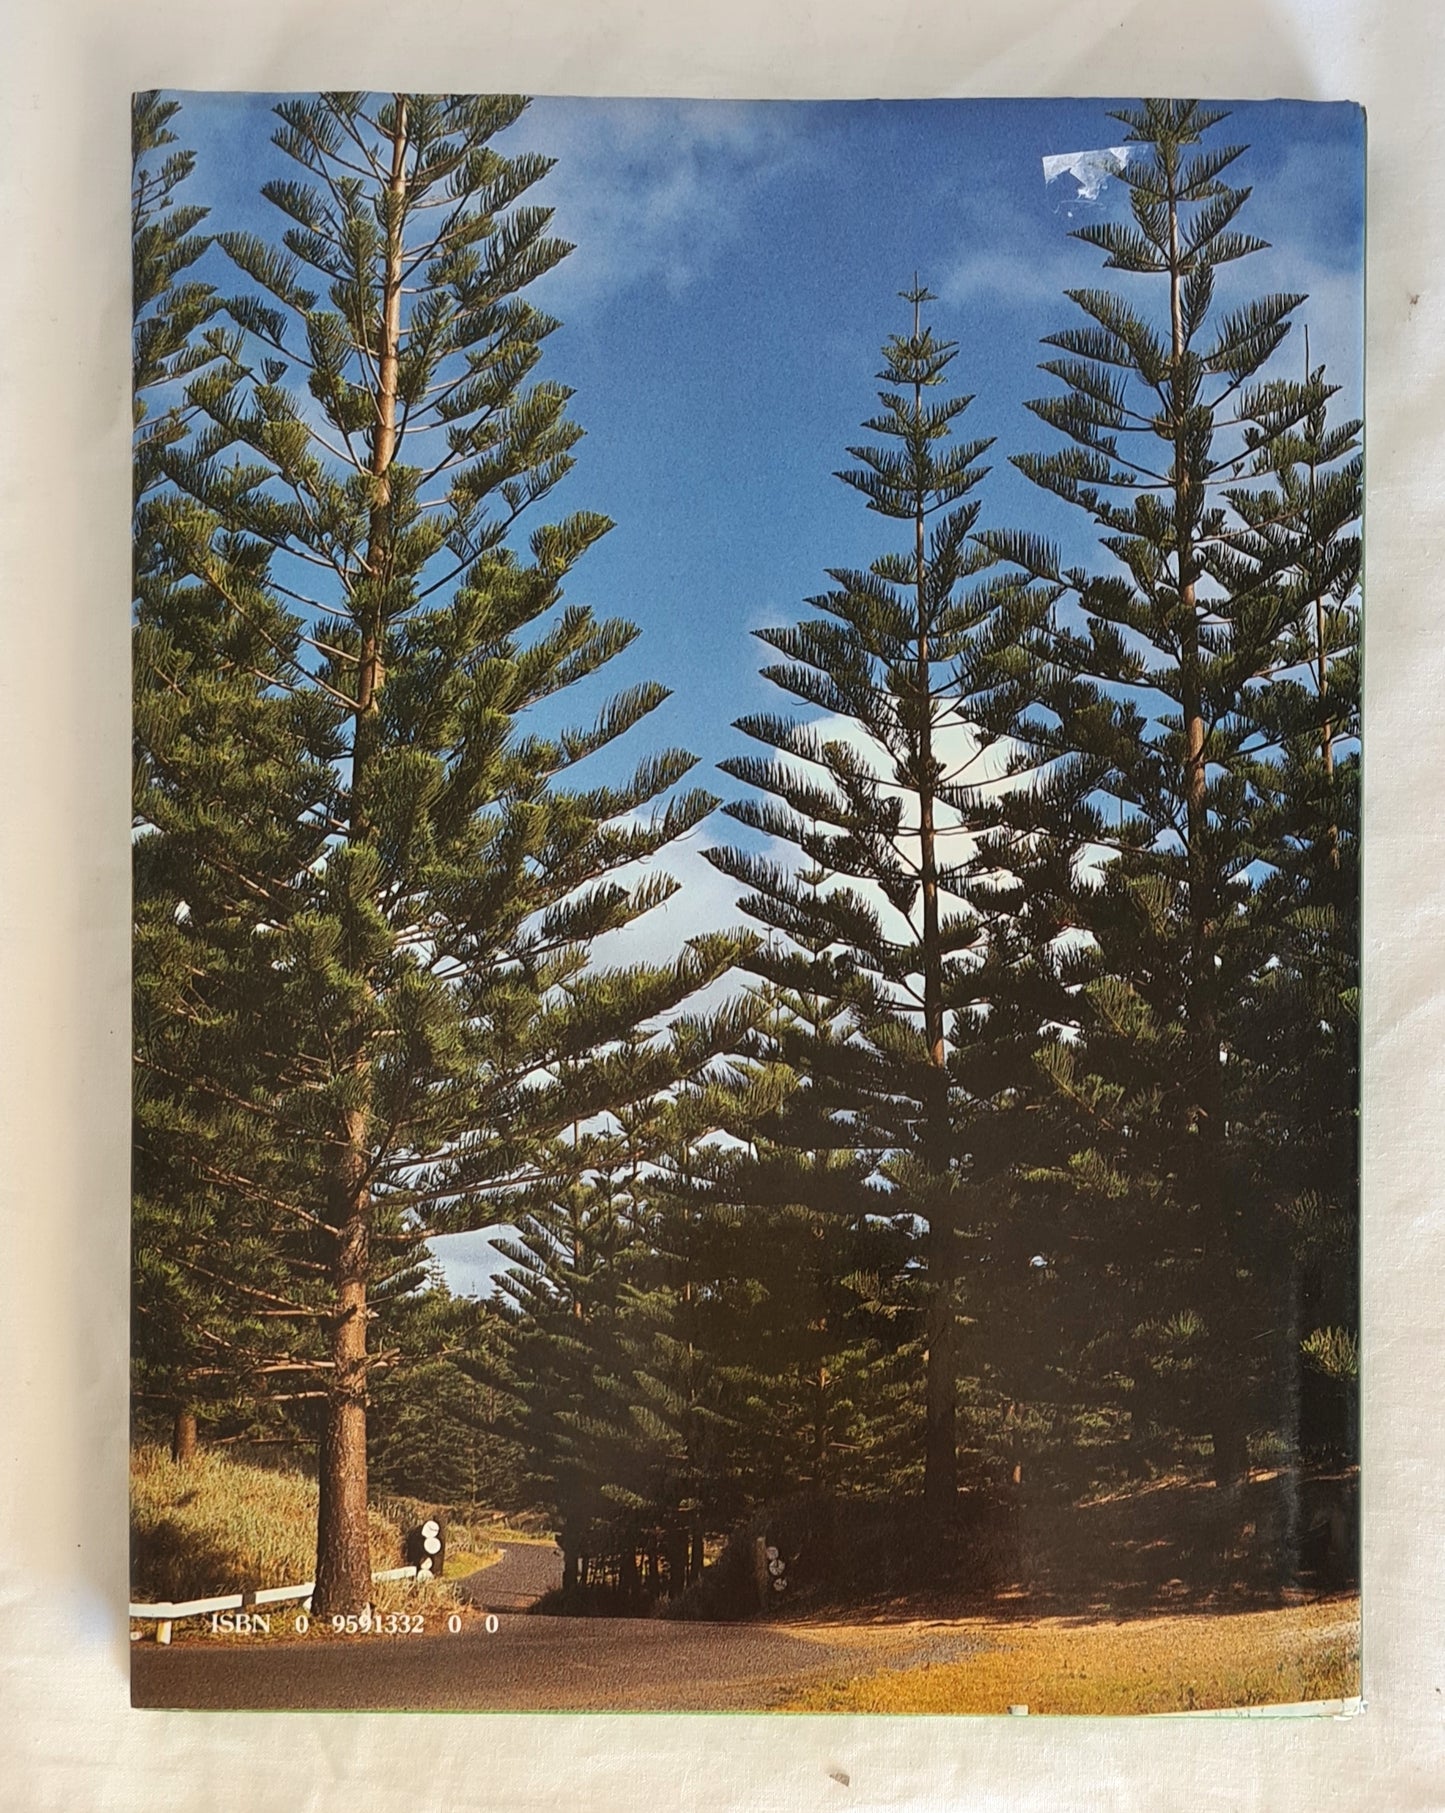 The Norfolk Island Book  by R. S. Hillier